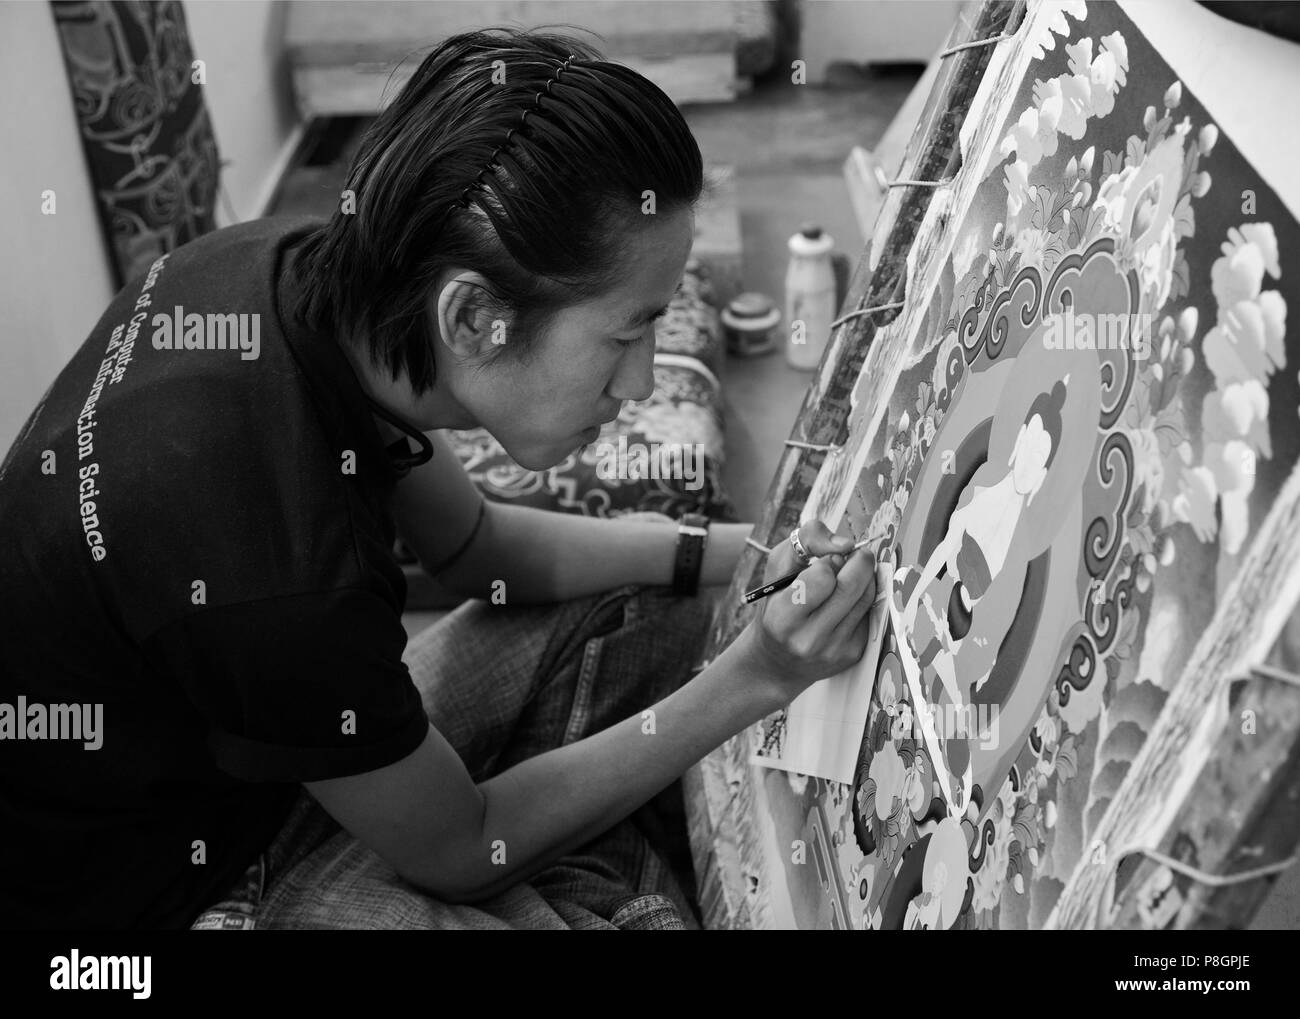 A THANKA PAINTER learns his craft at the NORBULINGKA INSTITUTE, a TIBETAN BUDDHIST CULTURAL CENTER - DHARAMSALA, INDIA Stock Photo